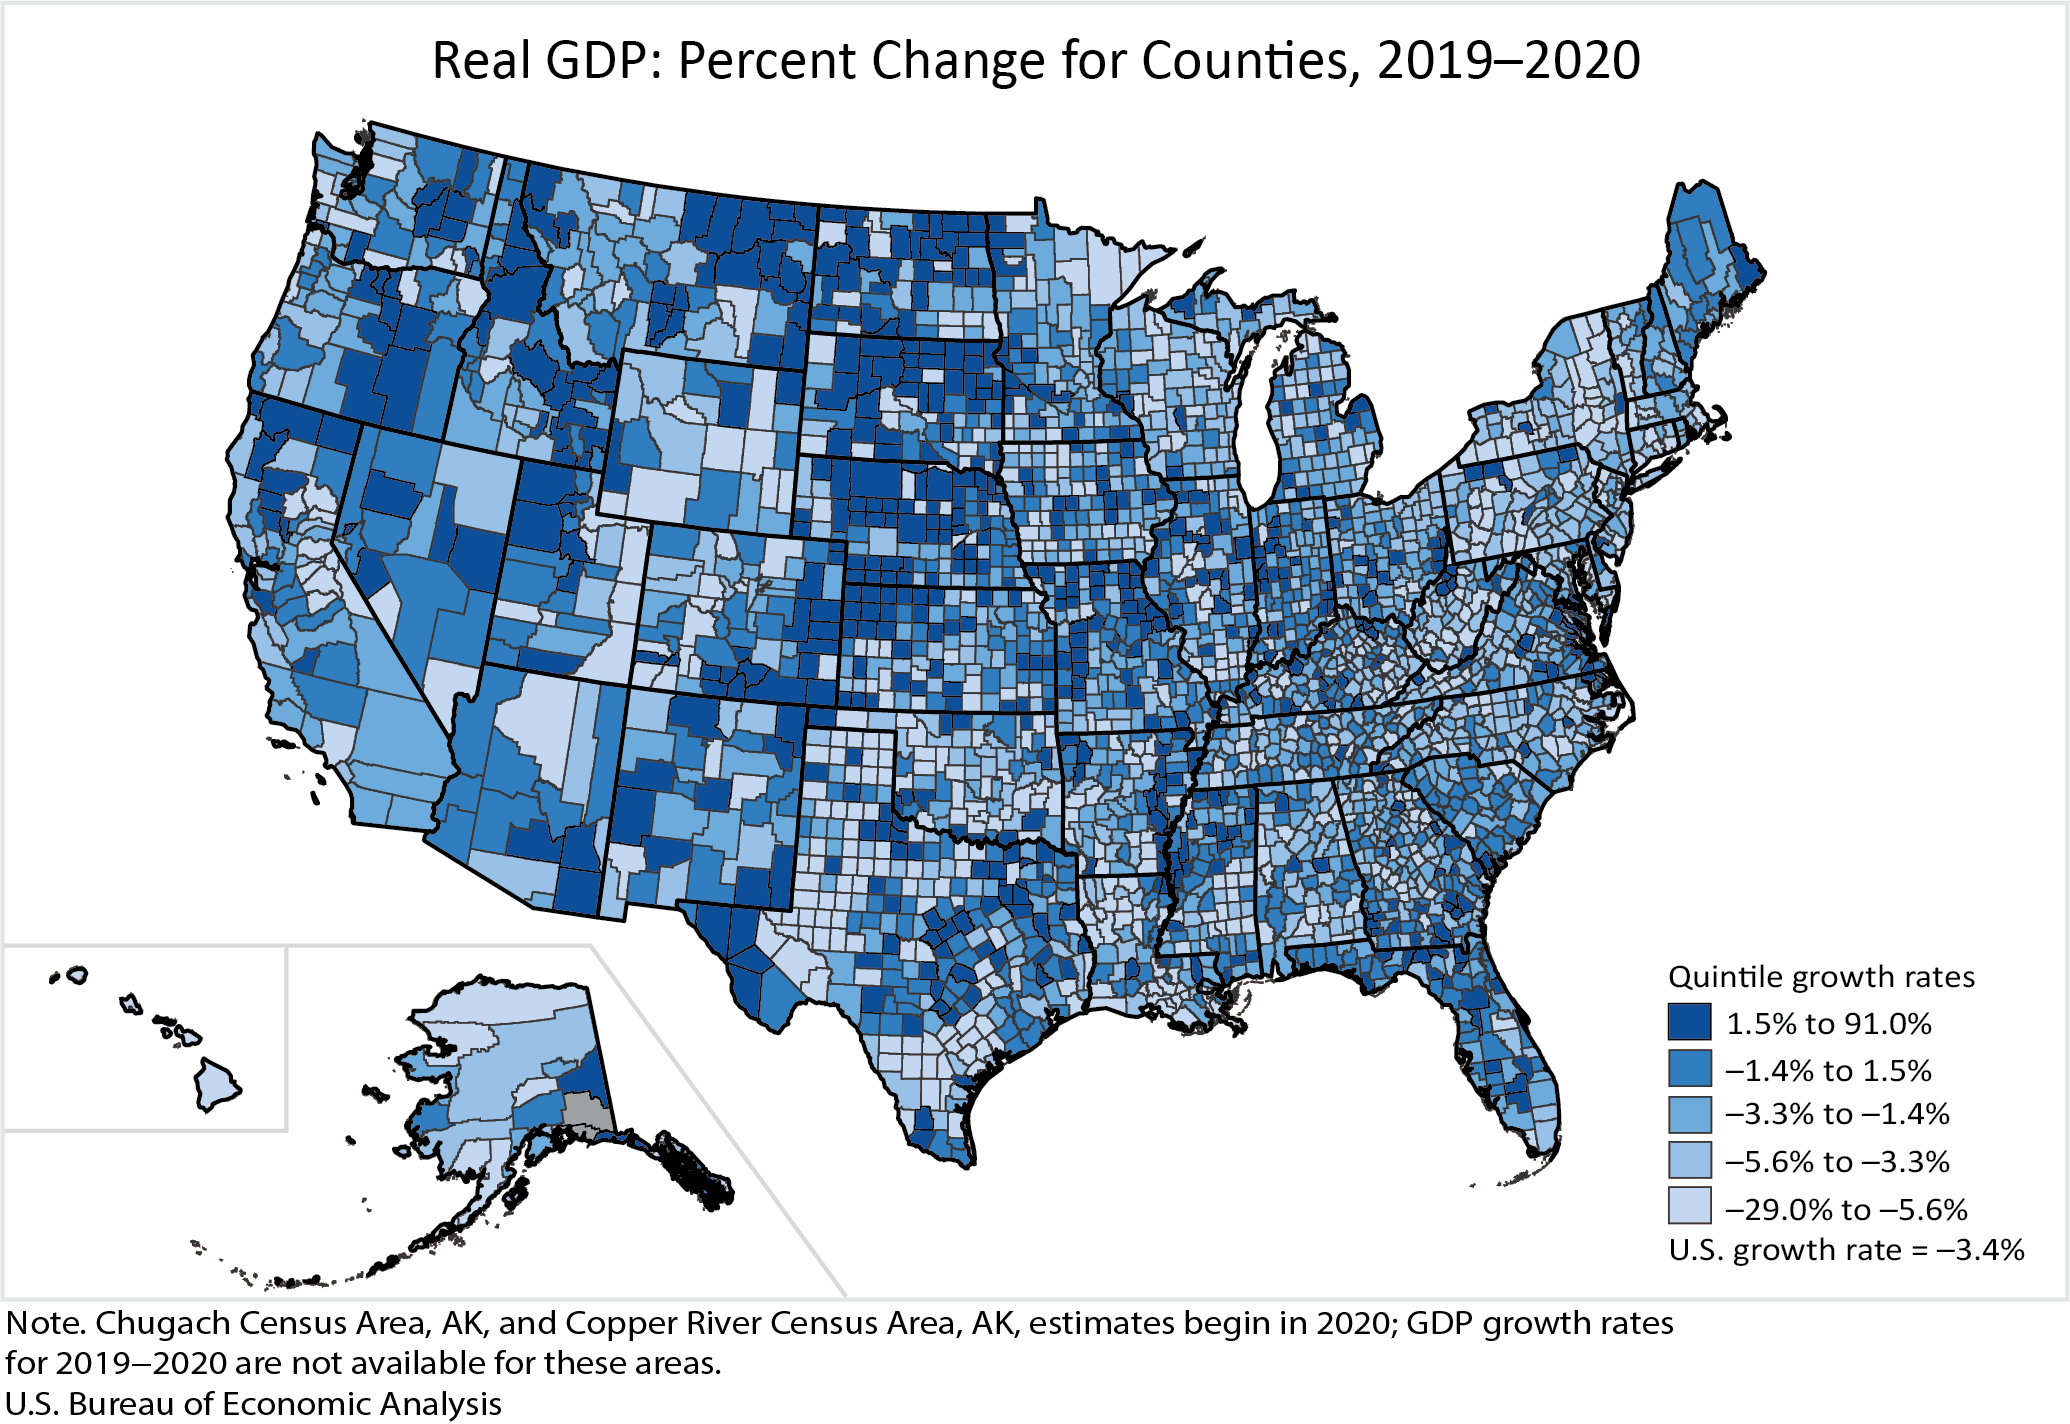 GDP by county, percent change from 2019 to 2020